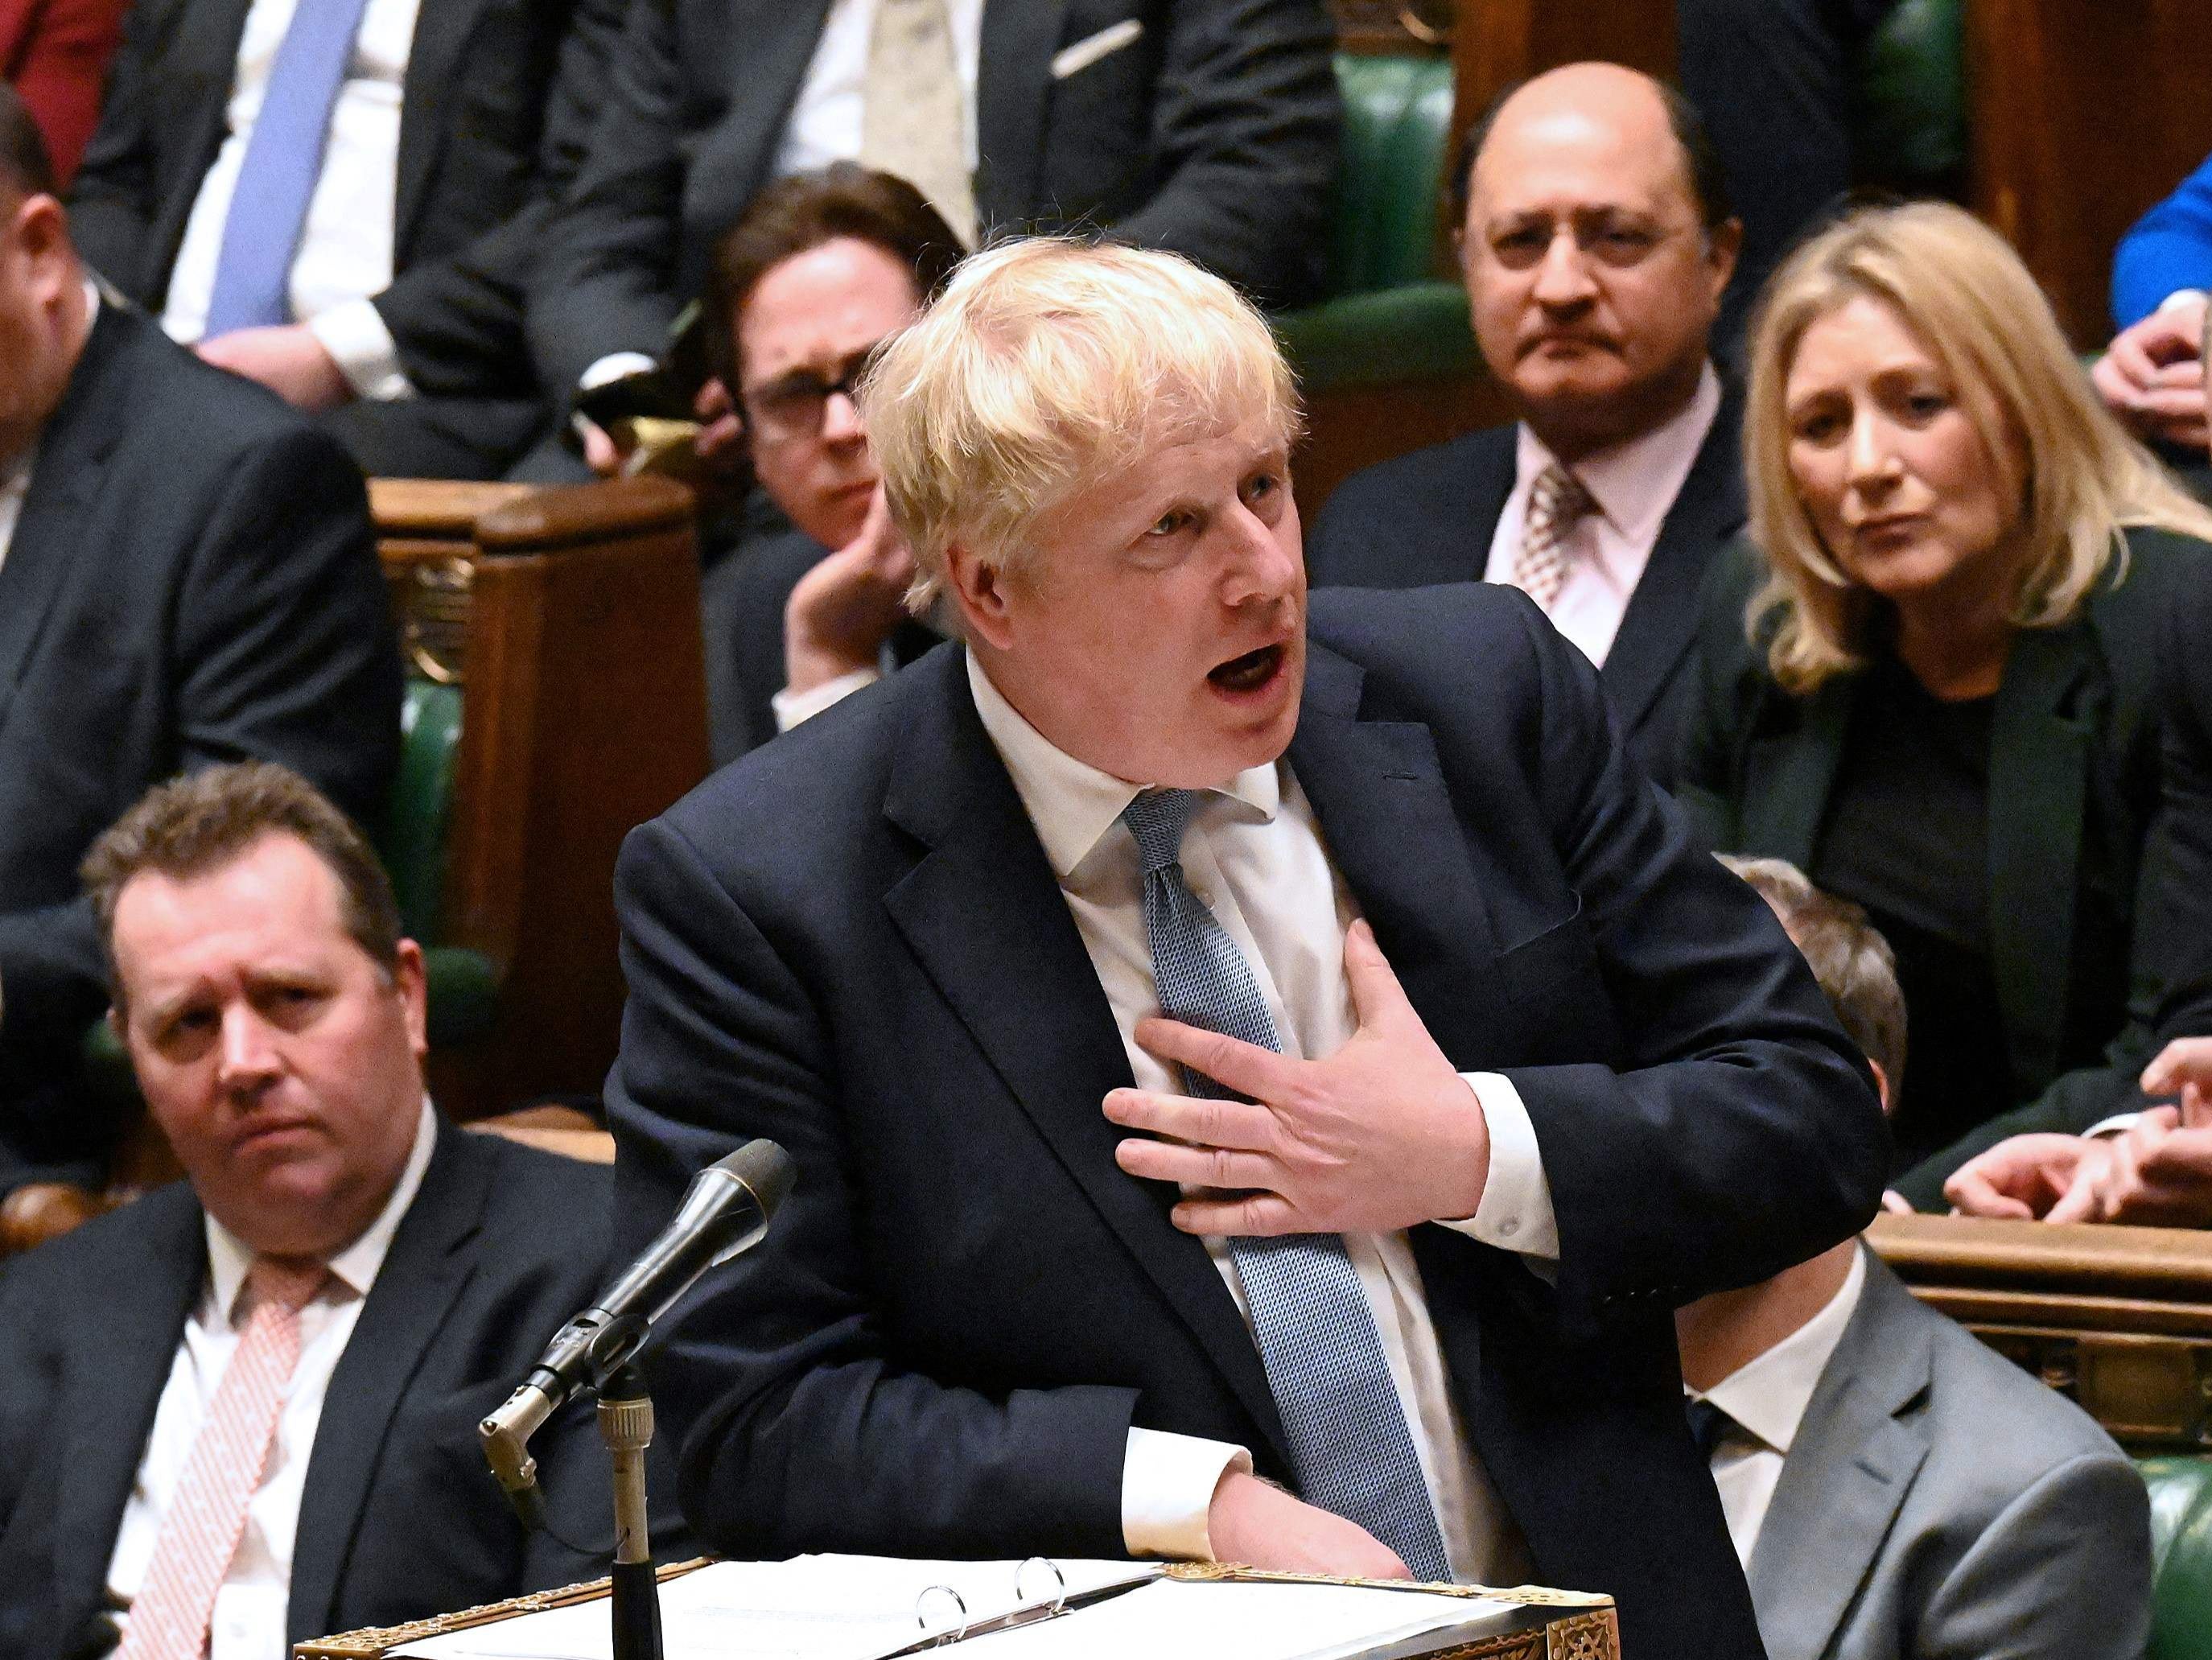 Boris Johnson has been accused of lying repeatedly